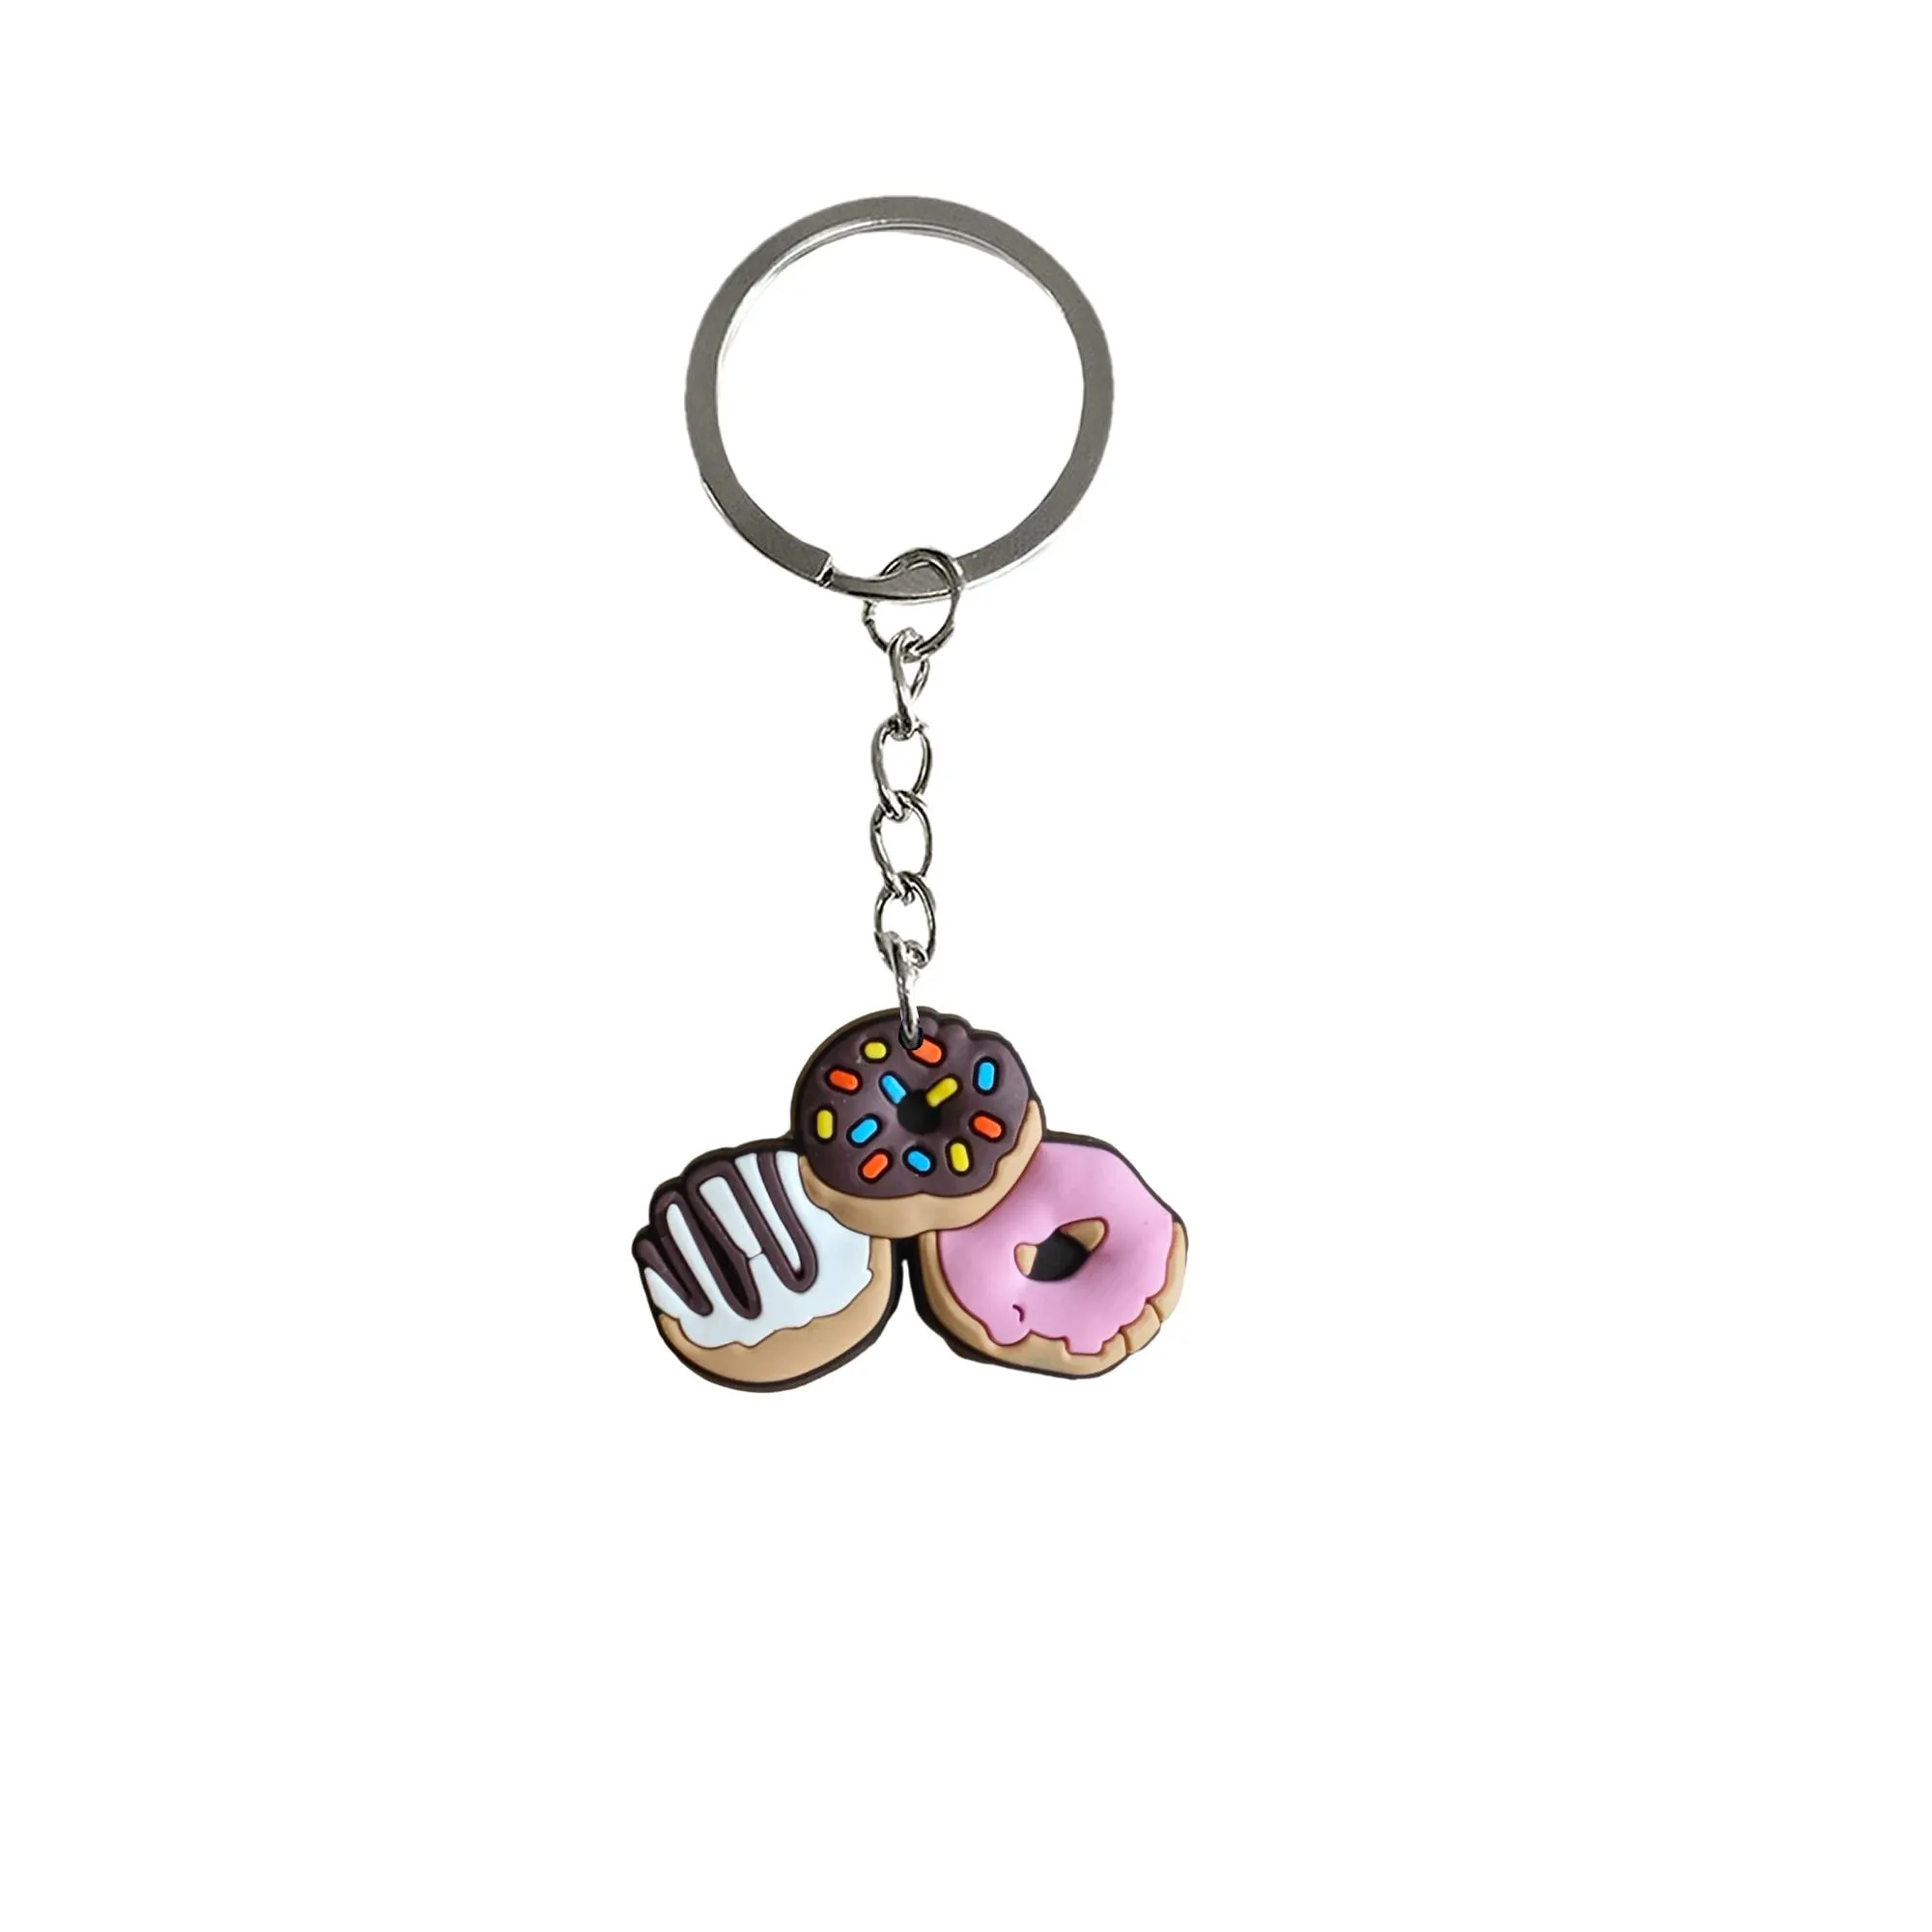 Charms Donuts Keychain For Classroom Prizes Boys Keychains Keyring Men Suitable Schoolbag Goodie Bag Stuffers Supplies Key Ring Women Otgqx